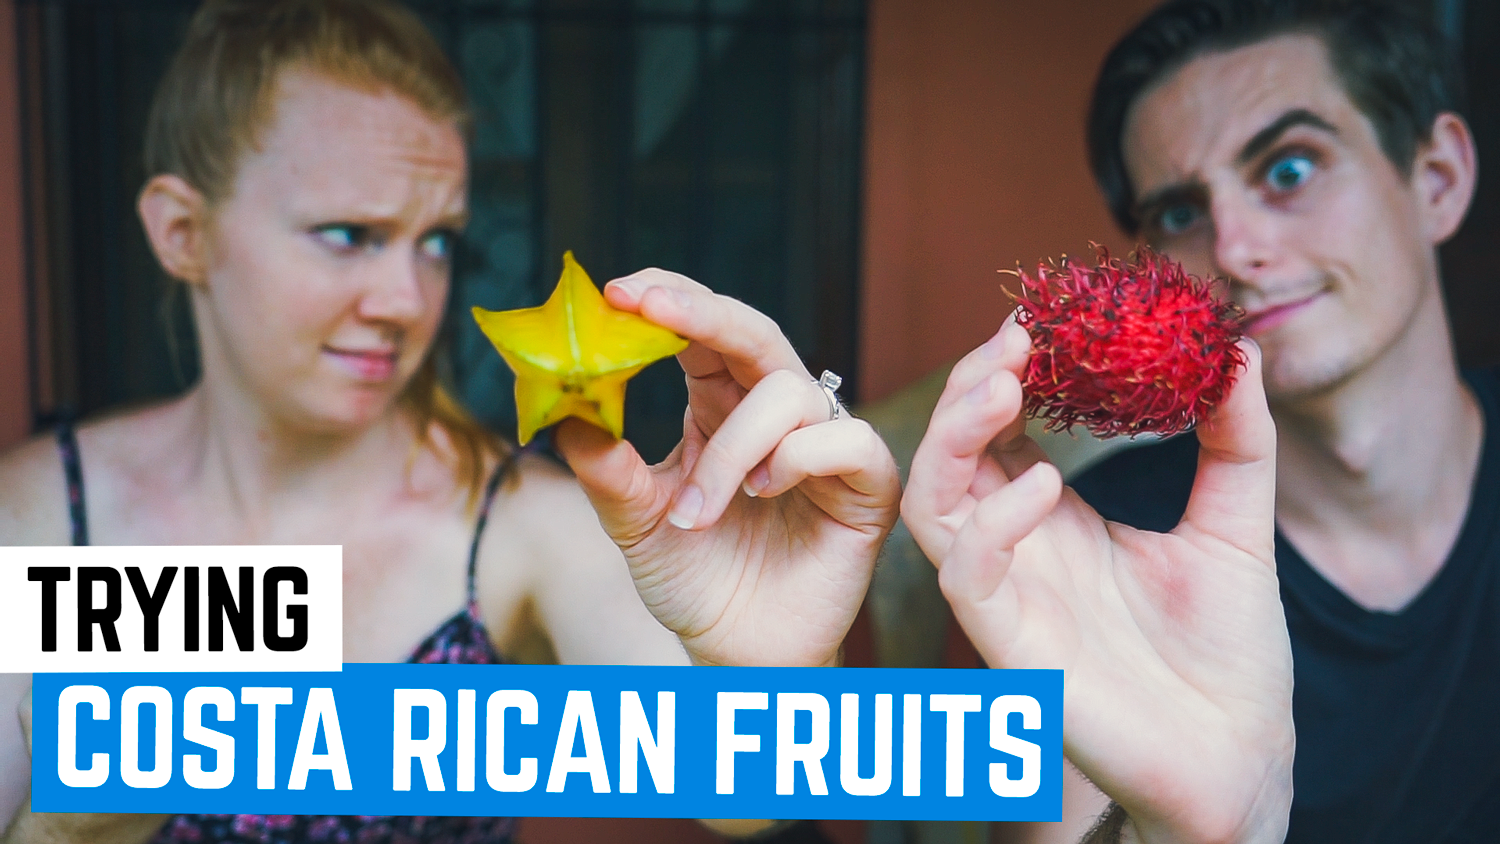 Americans Try Strange Costa Rican Fruits